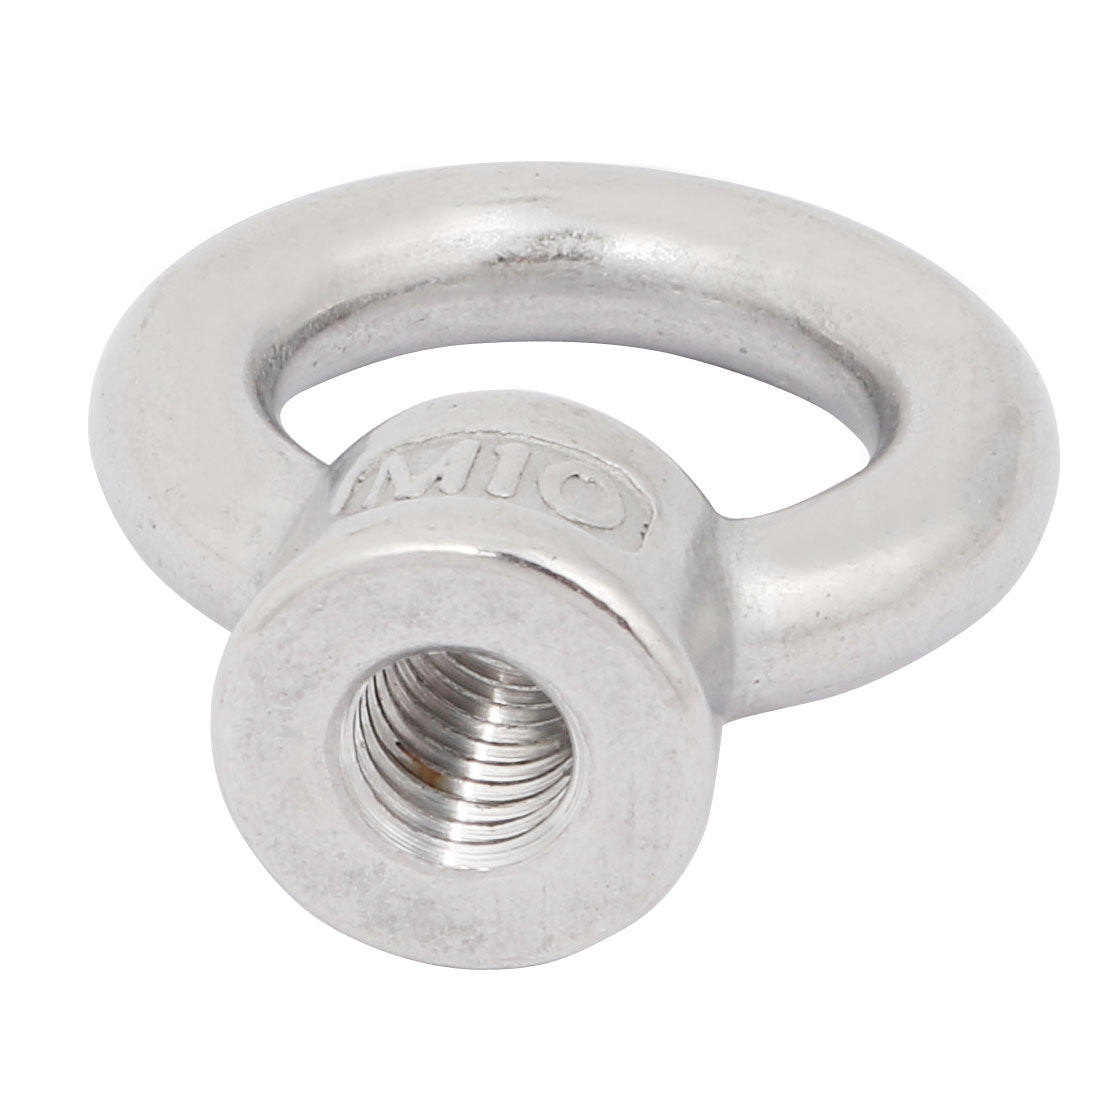 uxcell Uxcell M10 Thread 304 Stainless Steel Japanese Style Ring Shaped Lifting Eye Nut 2pcs